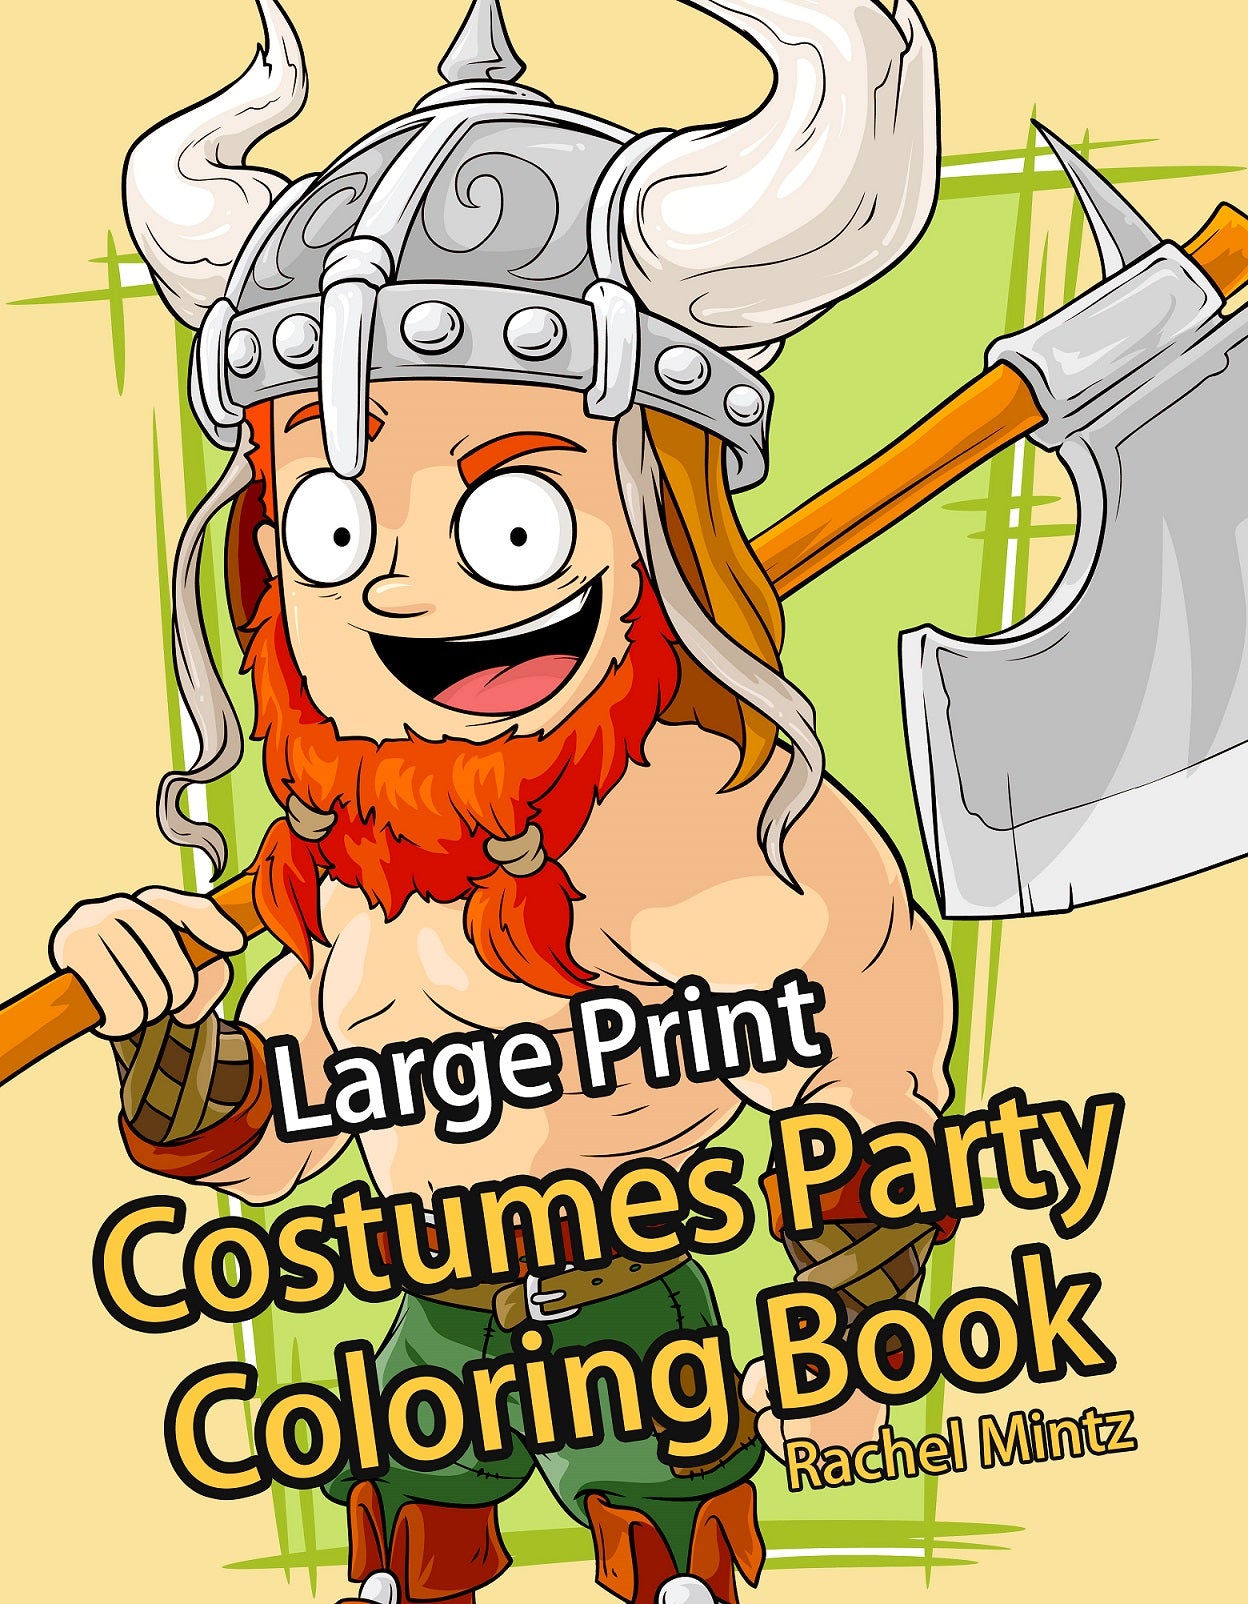 Large Print Costumes Party Coloring Book - Bold Lines, Easy Coloring For Halloween (Printable Format)